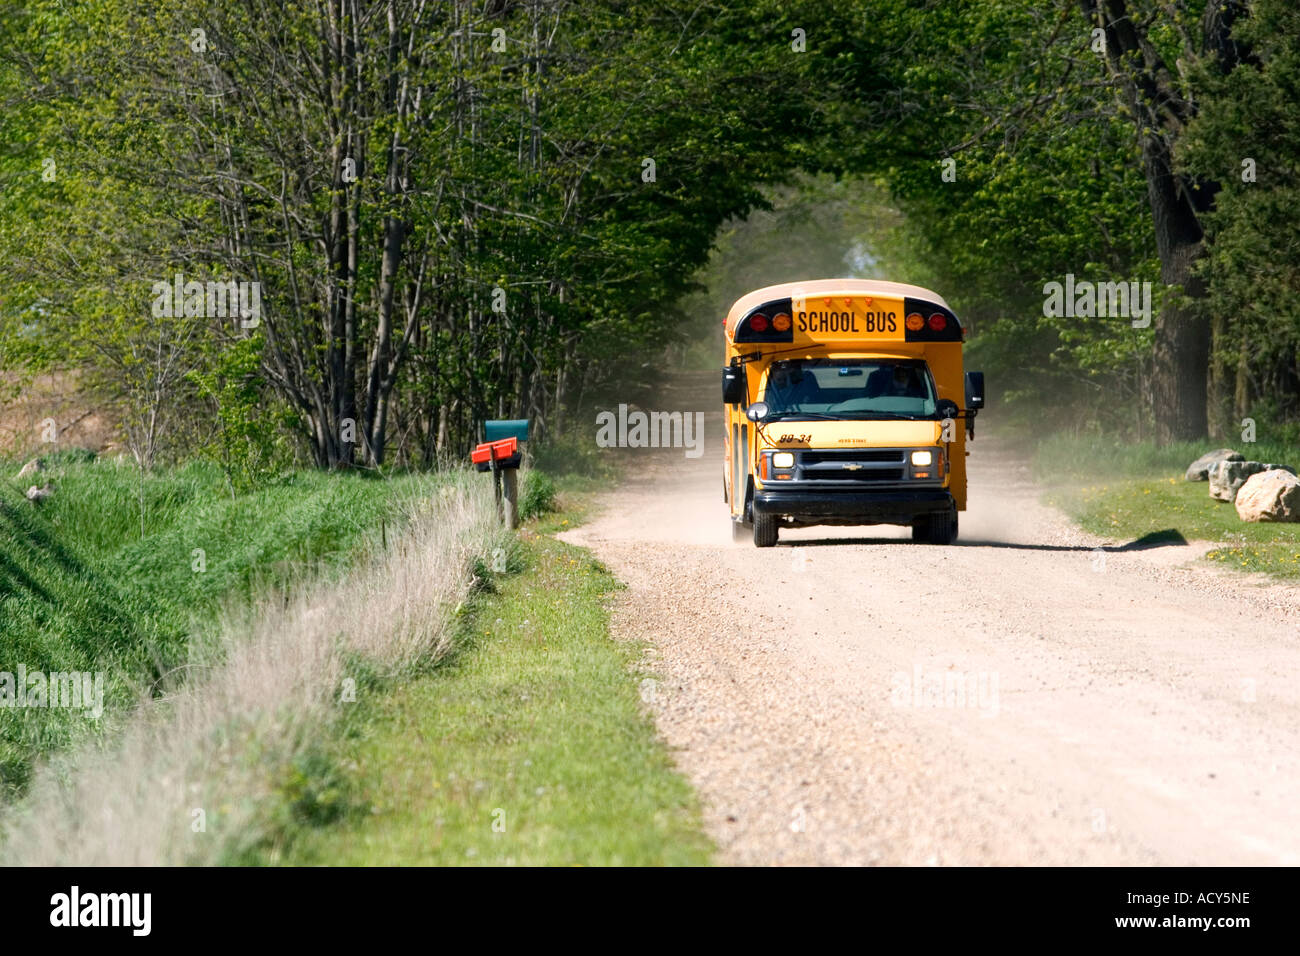 School bus on a country road near Clarksville, Michigan. Stock Photo